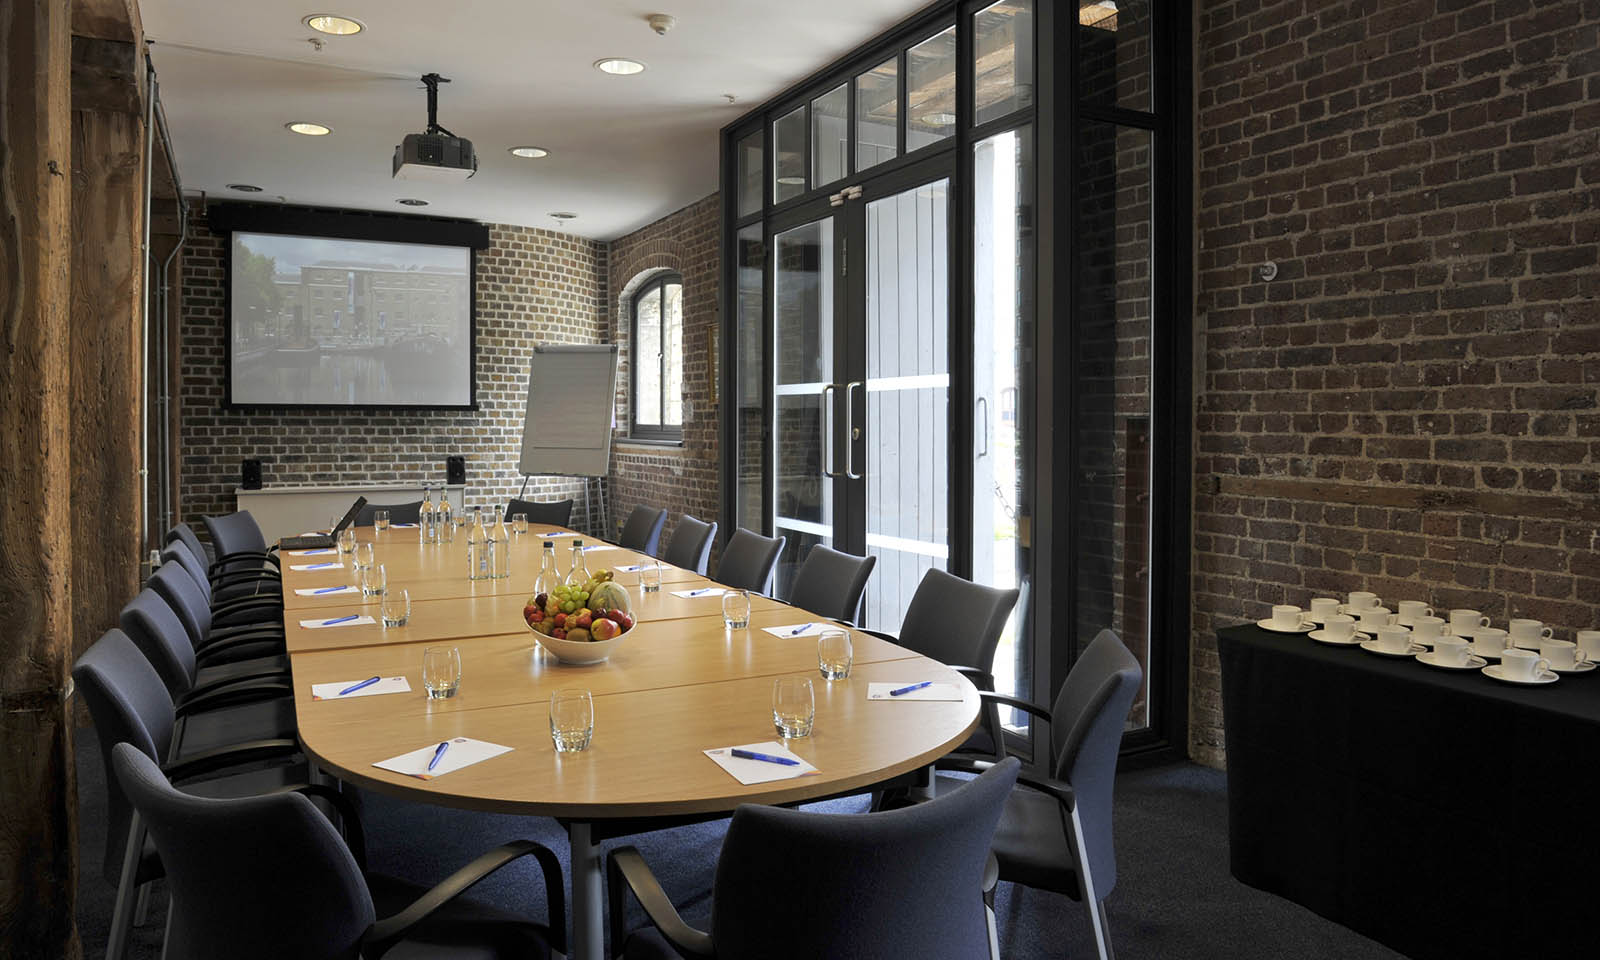 The boardroom at Museum of London Docklands ready for a conference or meeting